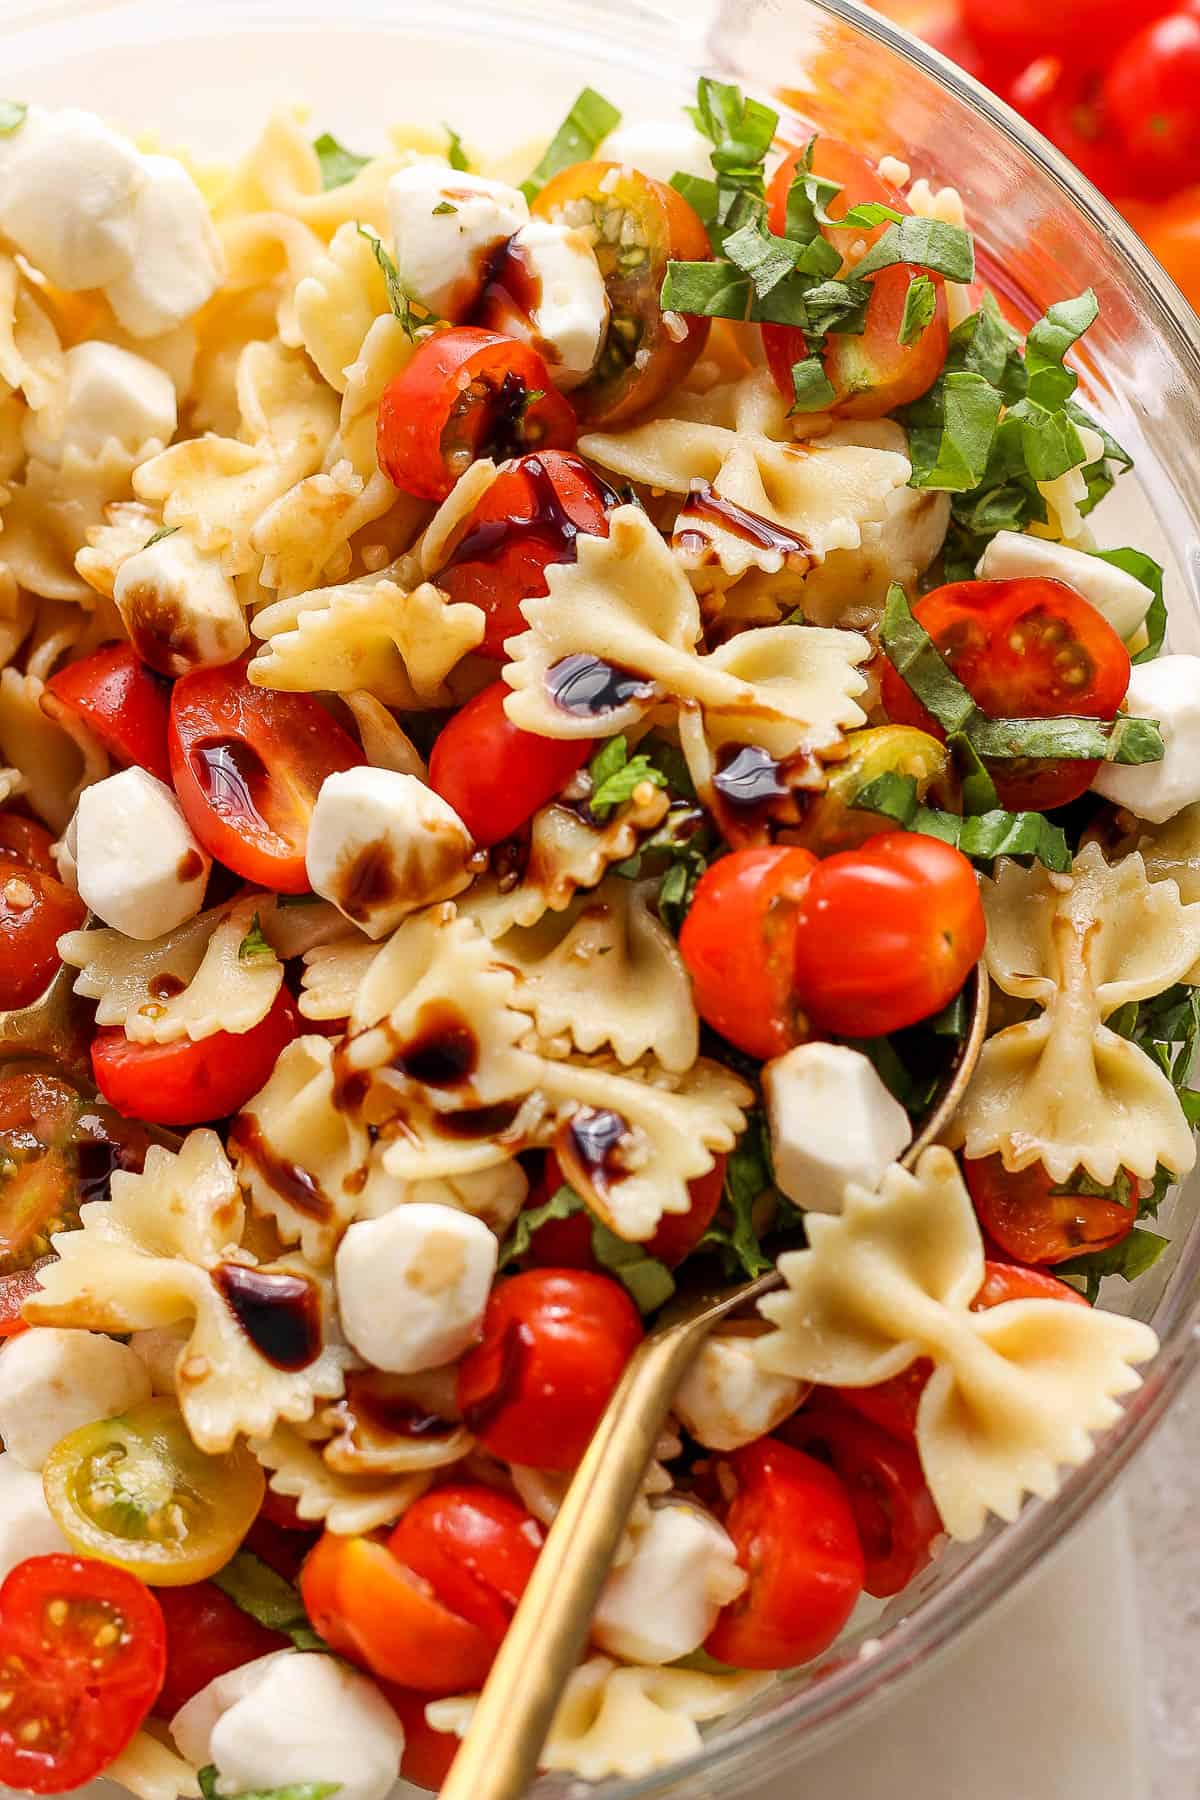 A caprese pasta salad drizzled with balsamic glaze.